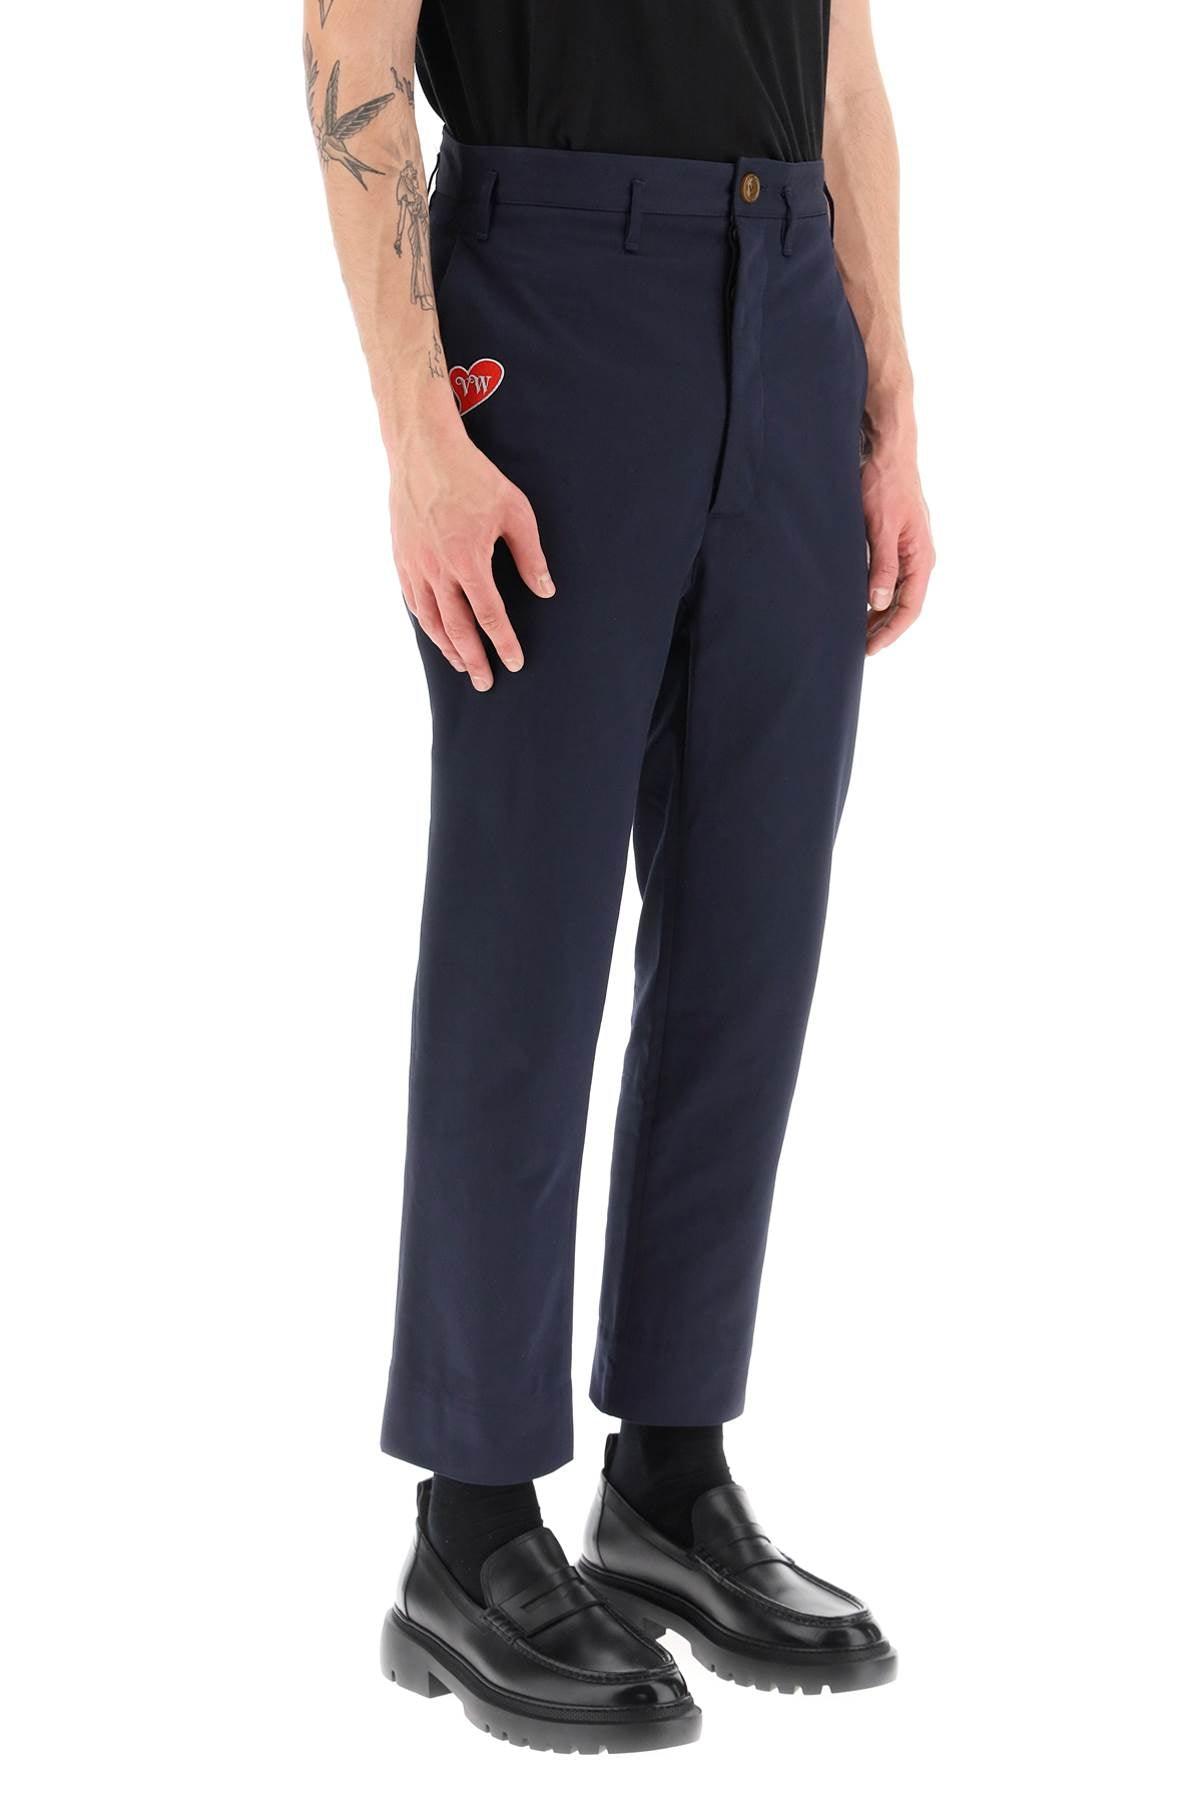 Vivienne Westwood Cropped Cruise Pants Featuring Embroidered Heart Shaped Logo - JOHN JULIA